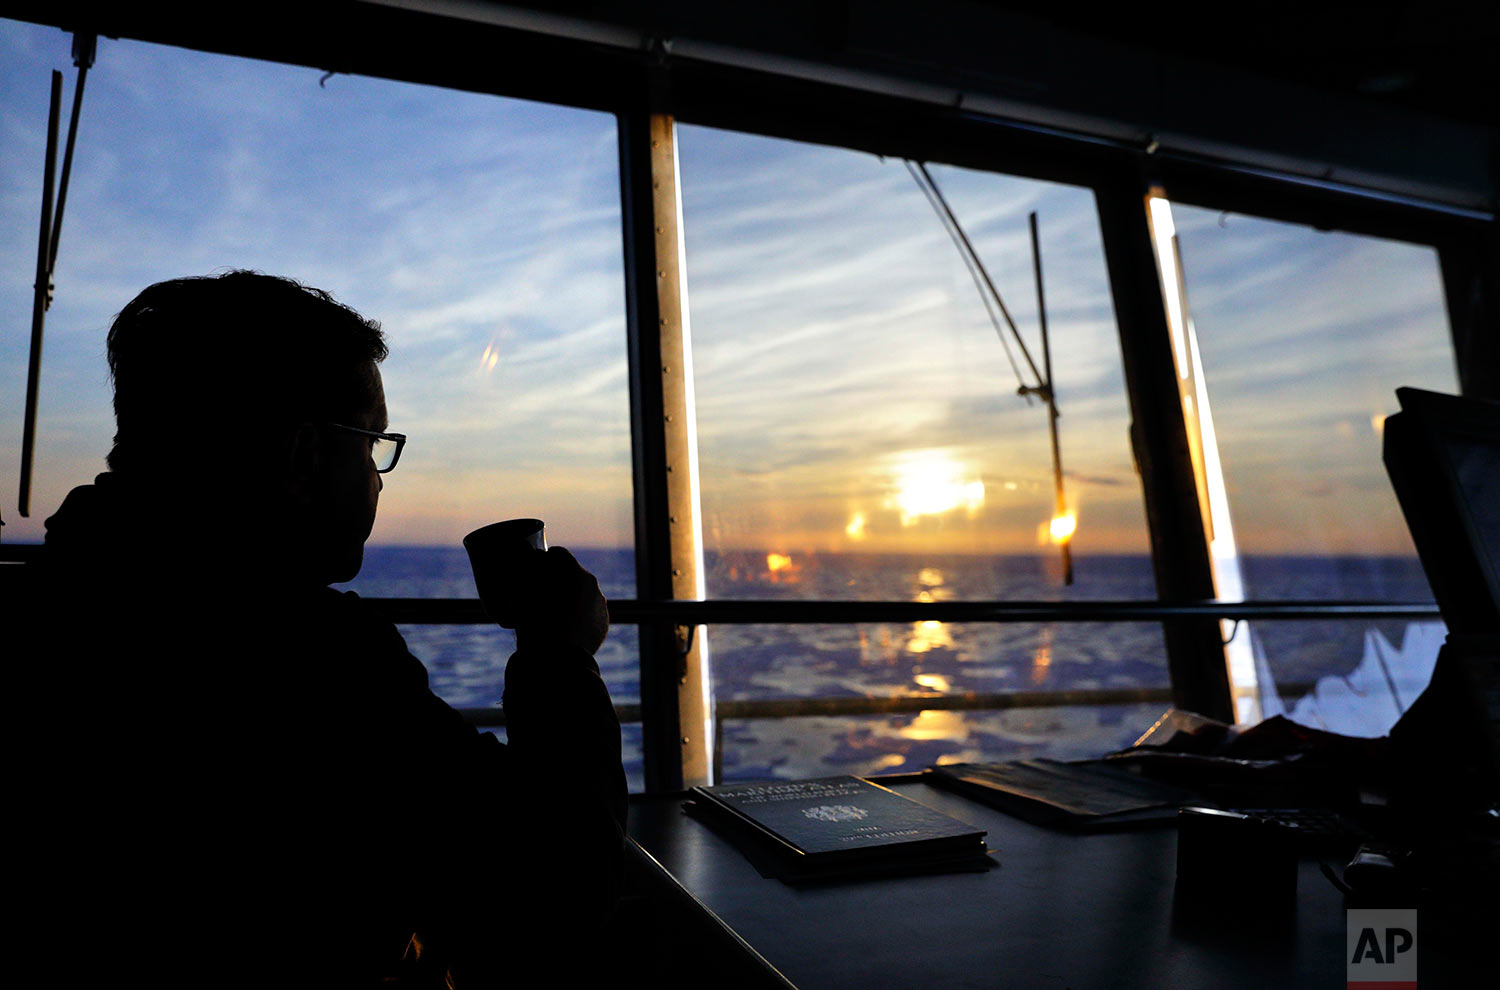  Sunlight is cast over the sea ice at midnight as Master Mariner Jyri Viljanen, captain of the Finnish icebreaker MSV Nordica, sips a cappuccino while overseeing the navigation of the Northwest Passage through the Victoria Strait in the Canadian Arct